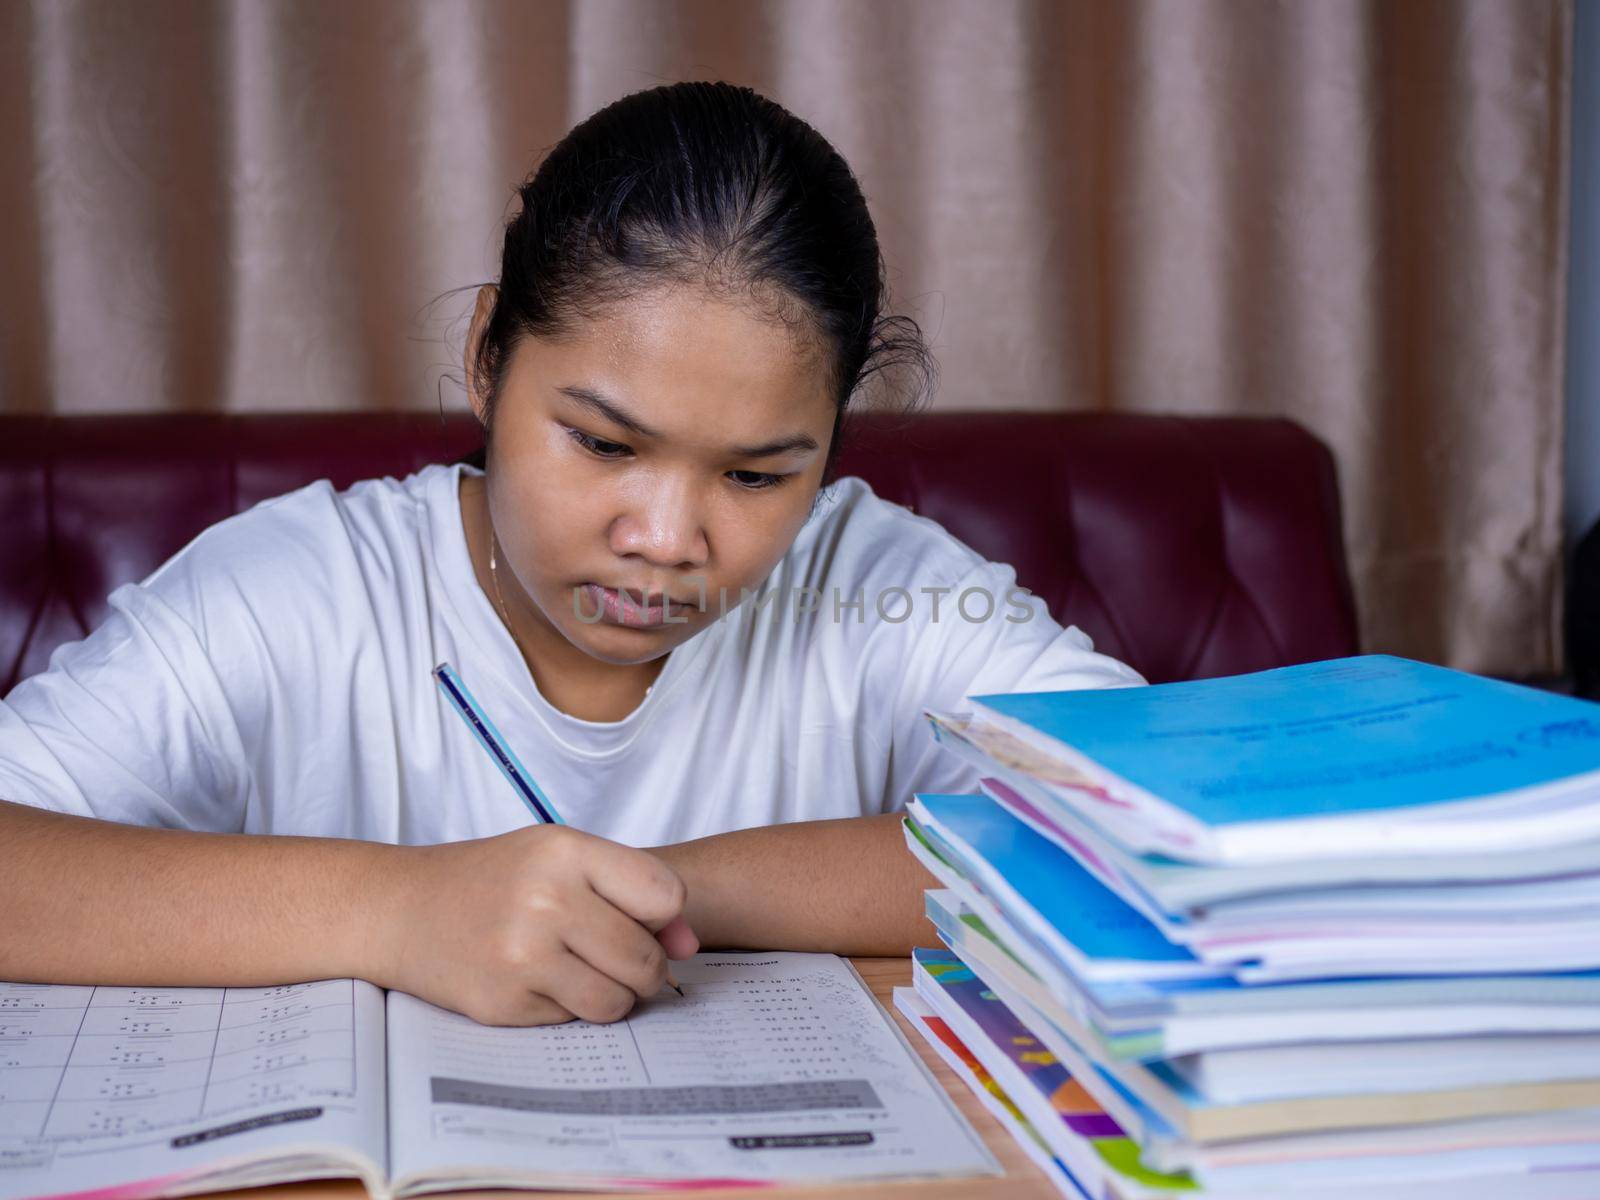 girl doing homework on a wooden table and there was a pile of books next to it The background is a red sofa and cream curtains. by Unimages2527